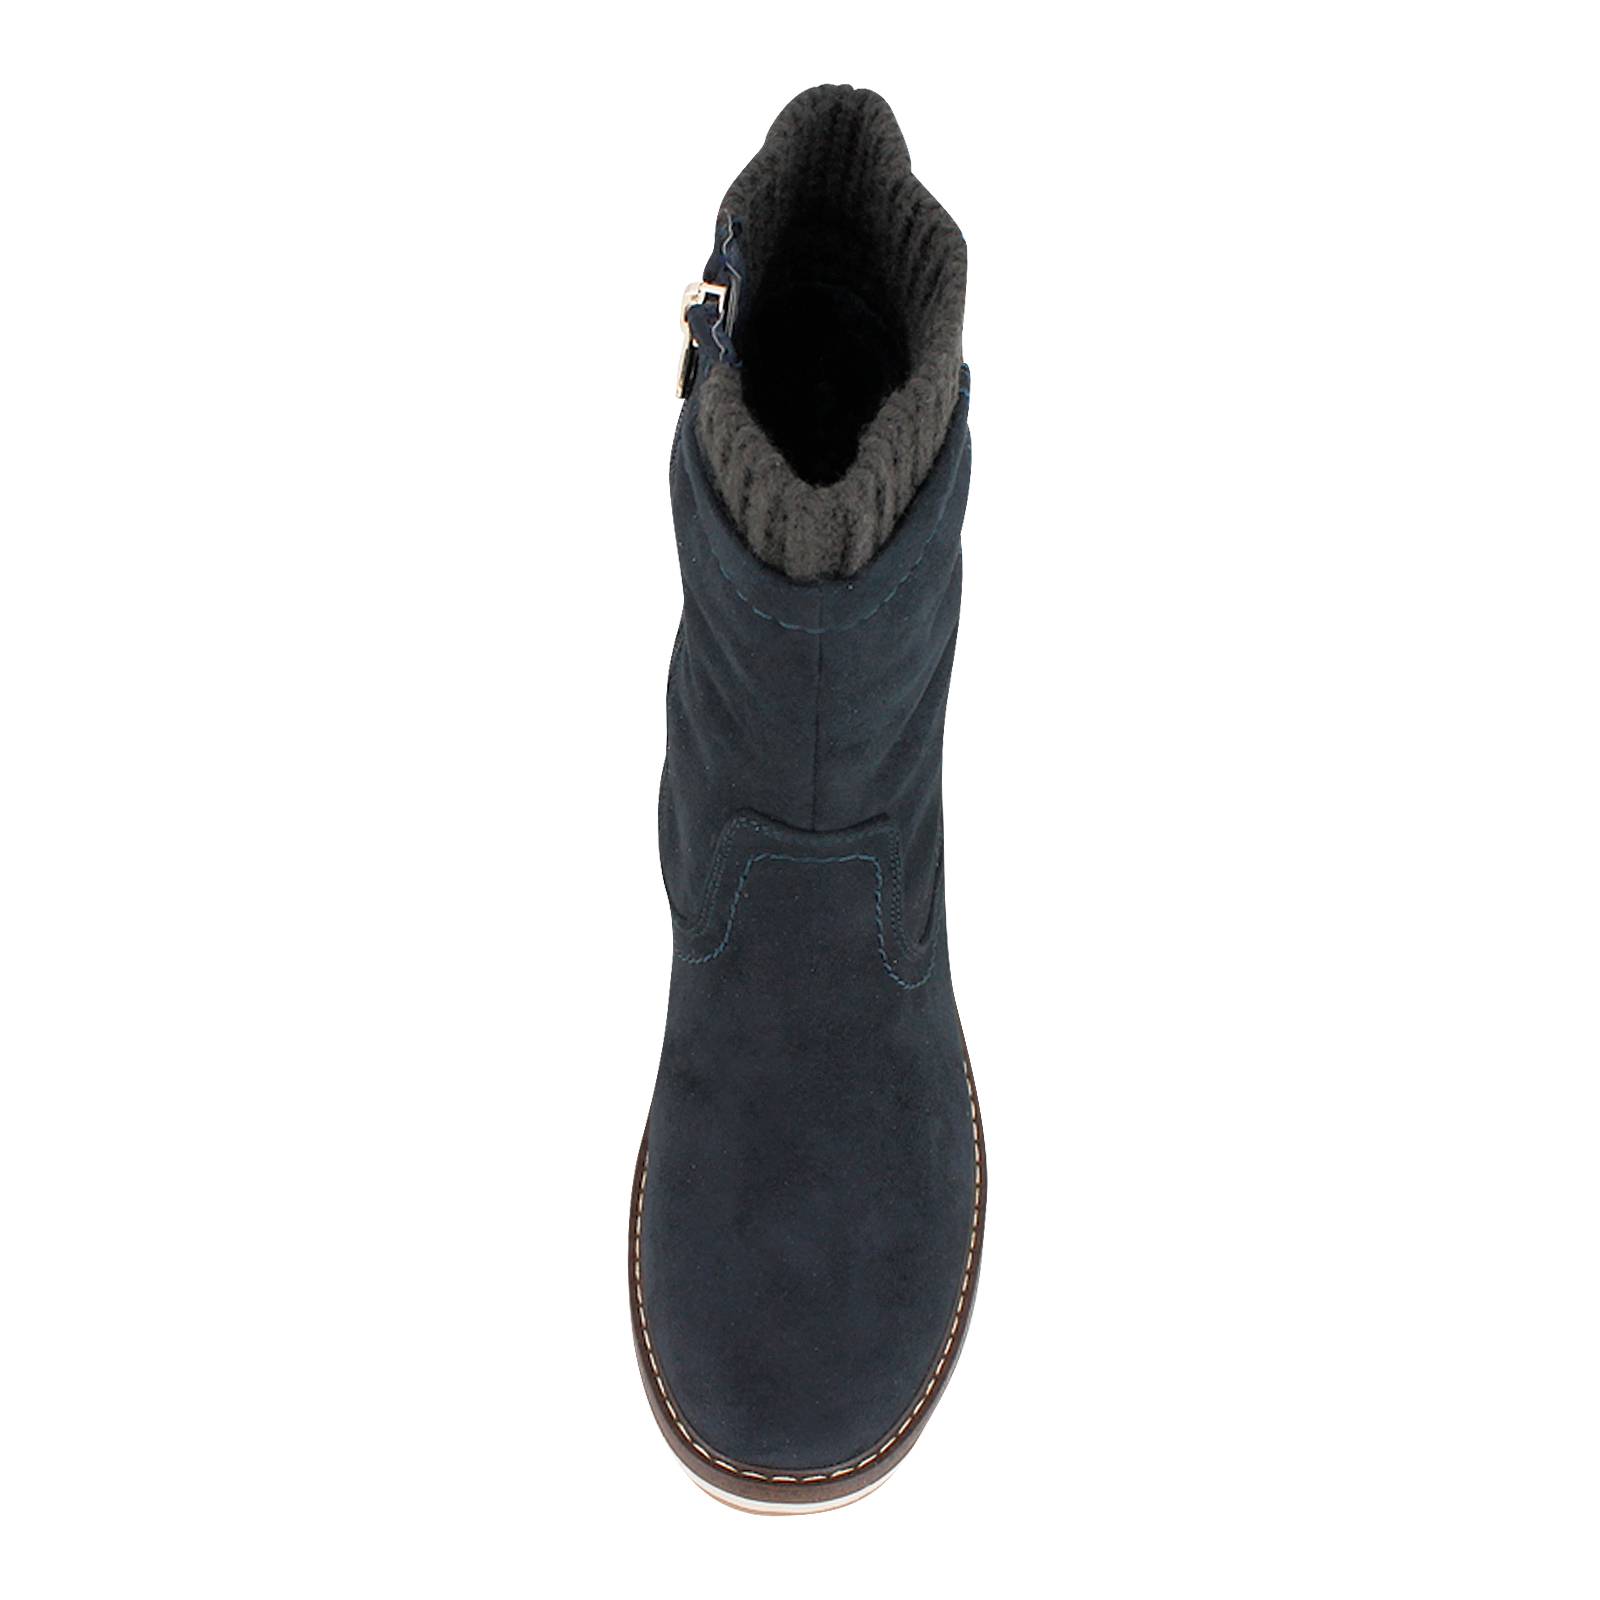 Tongtian - Tom Tailor Women's low boots made of synthetic suede - Gianna  Kazakou Online